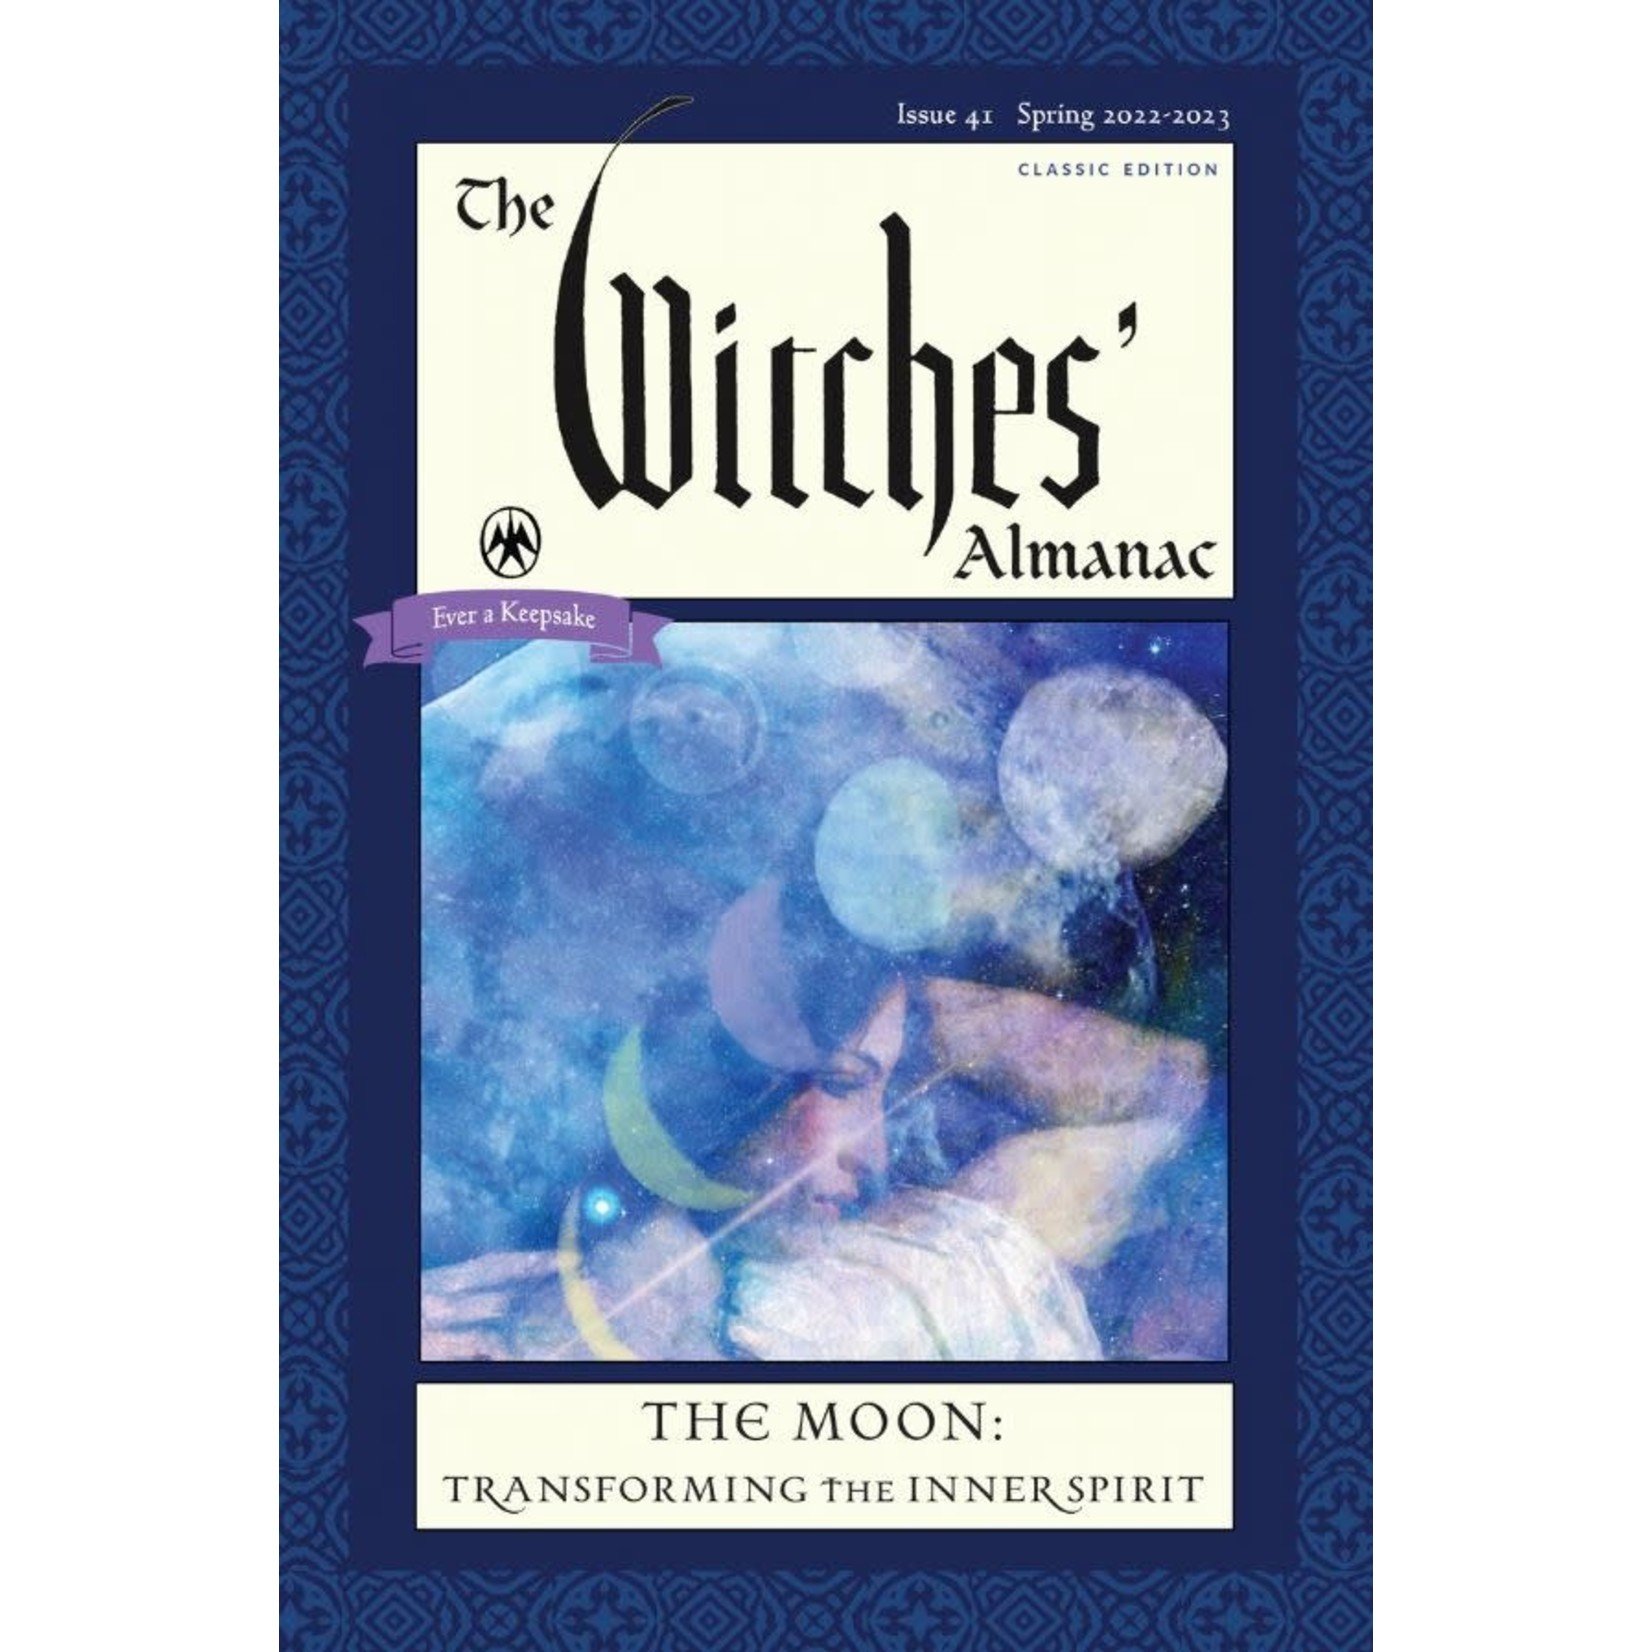 The Witches' Almanac Spring 2022-2023